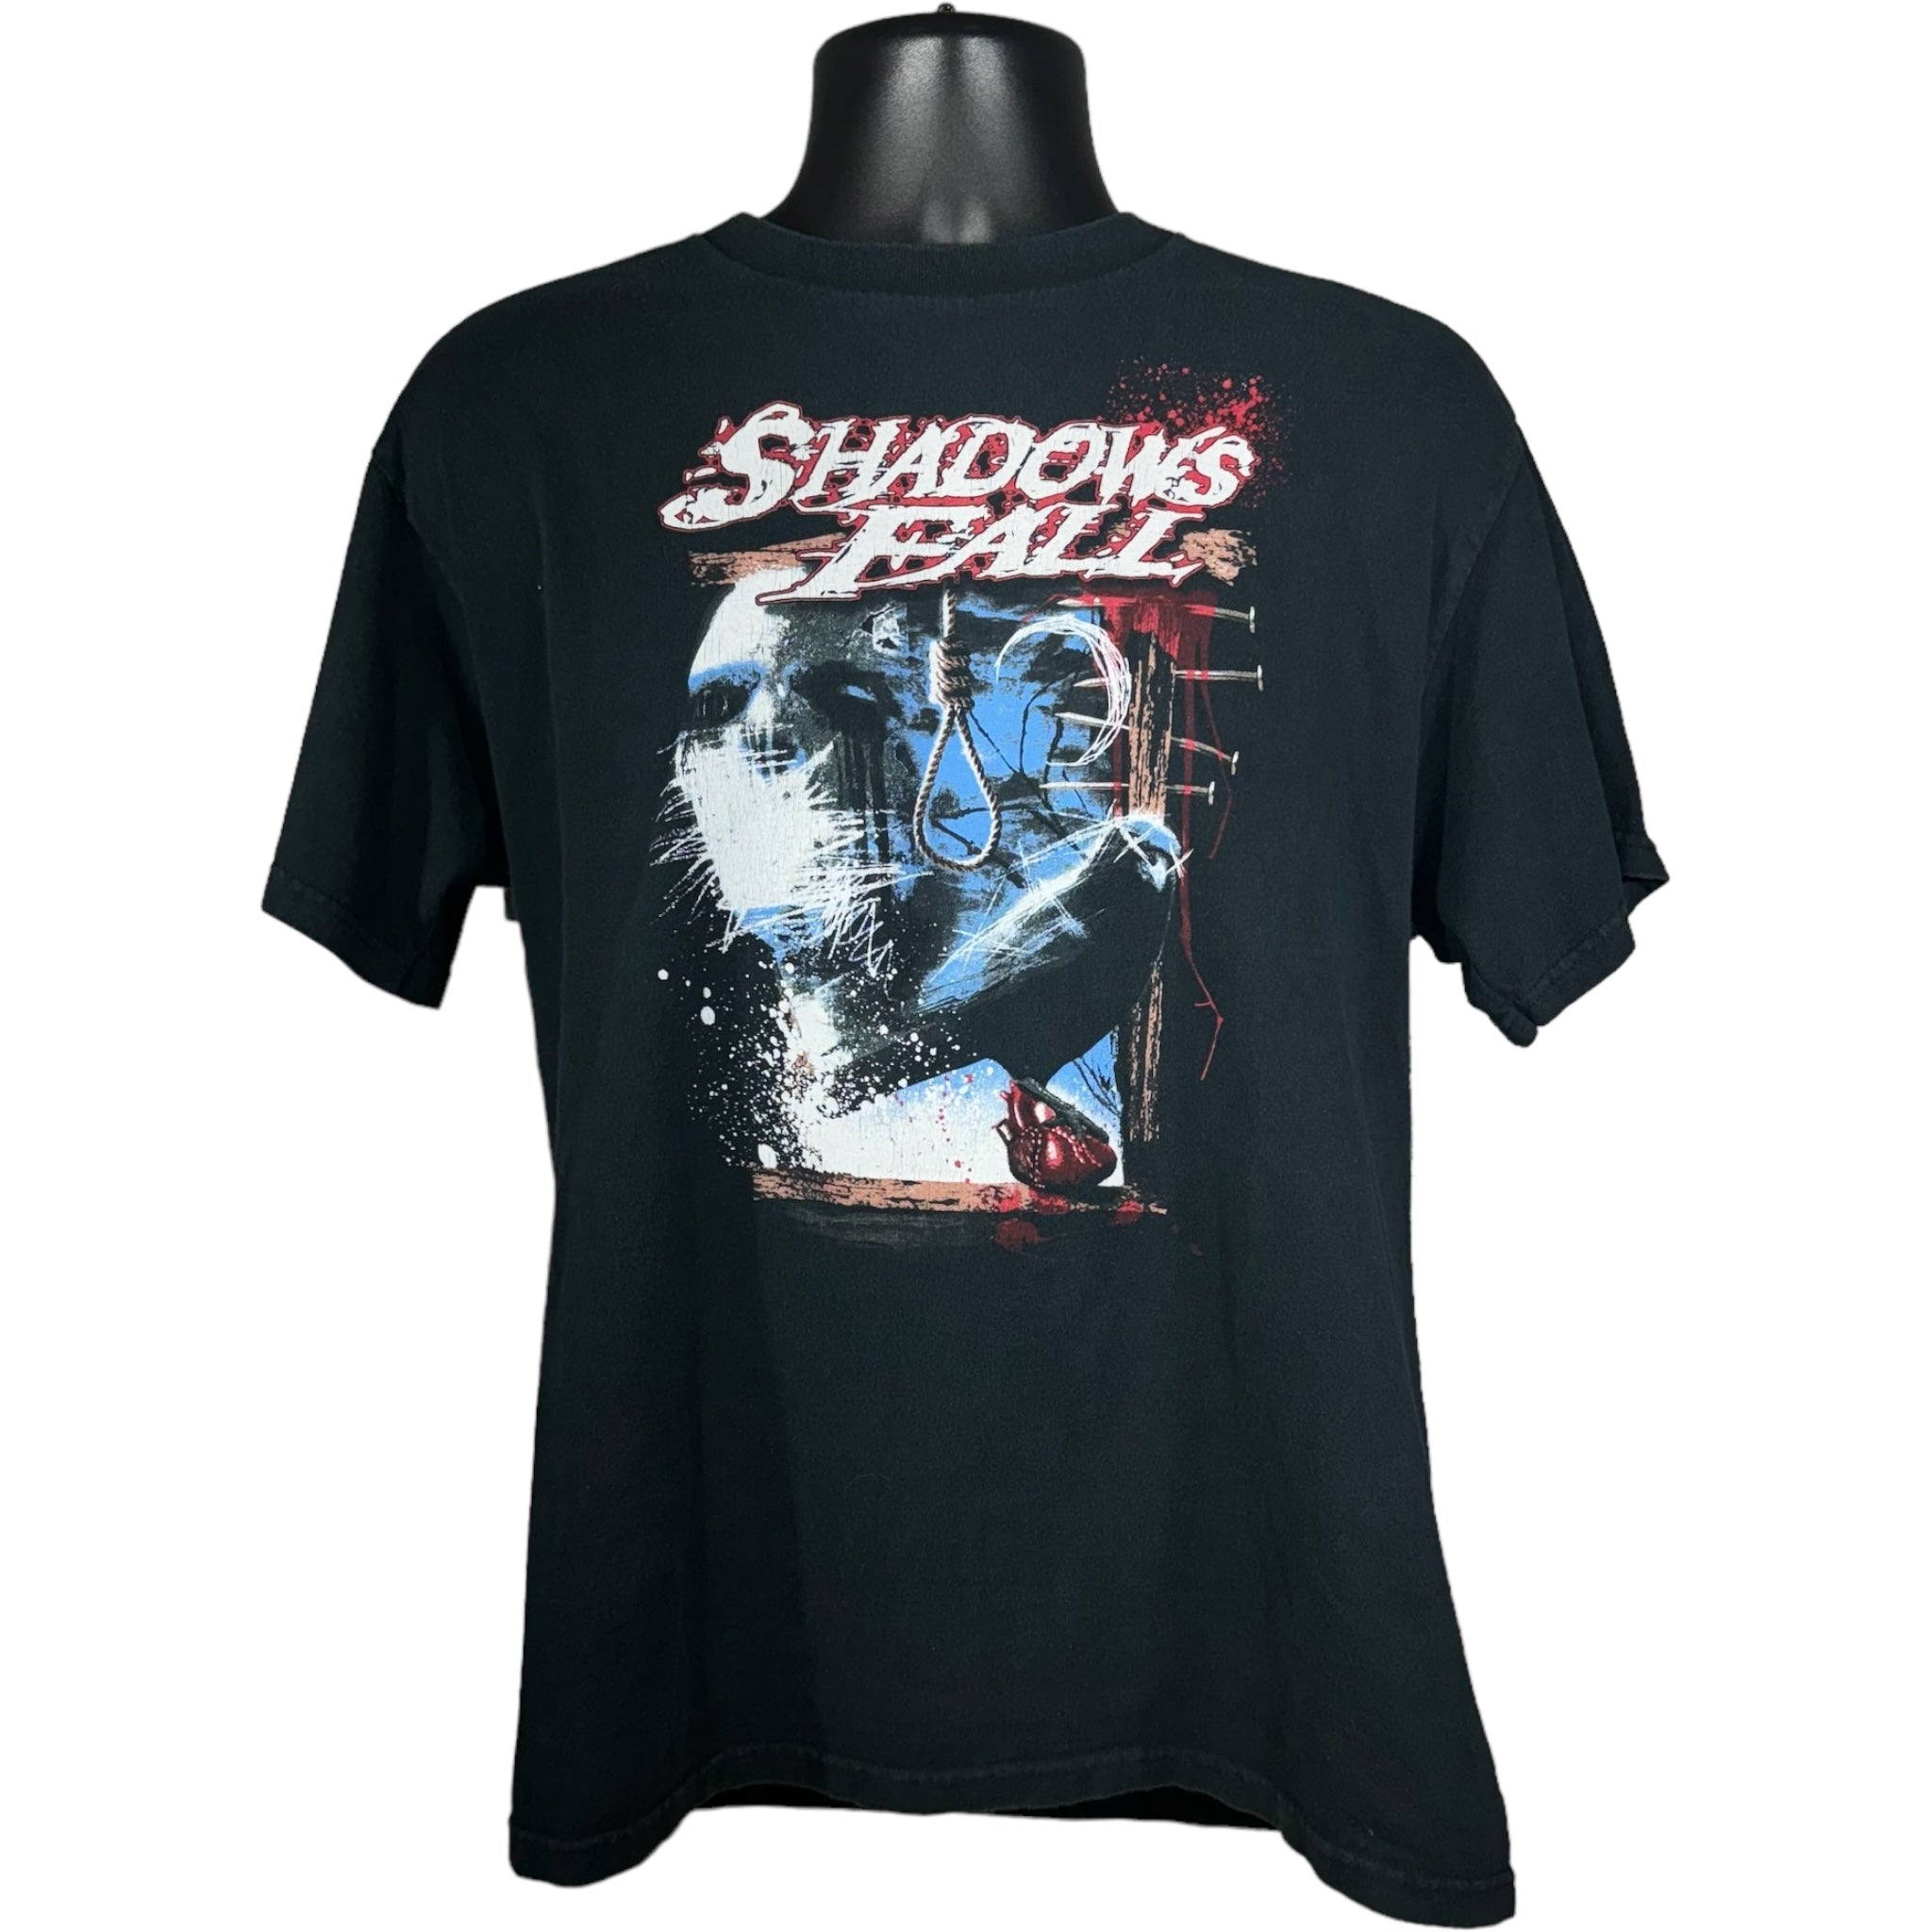 Vintage Shadows Fall "The War Within" Tour Tee 2004